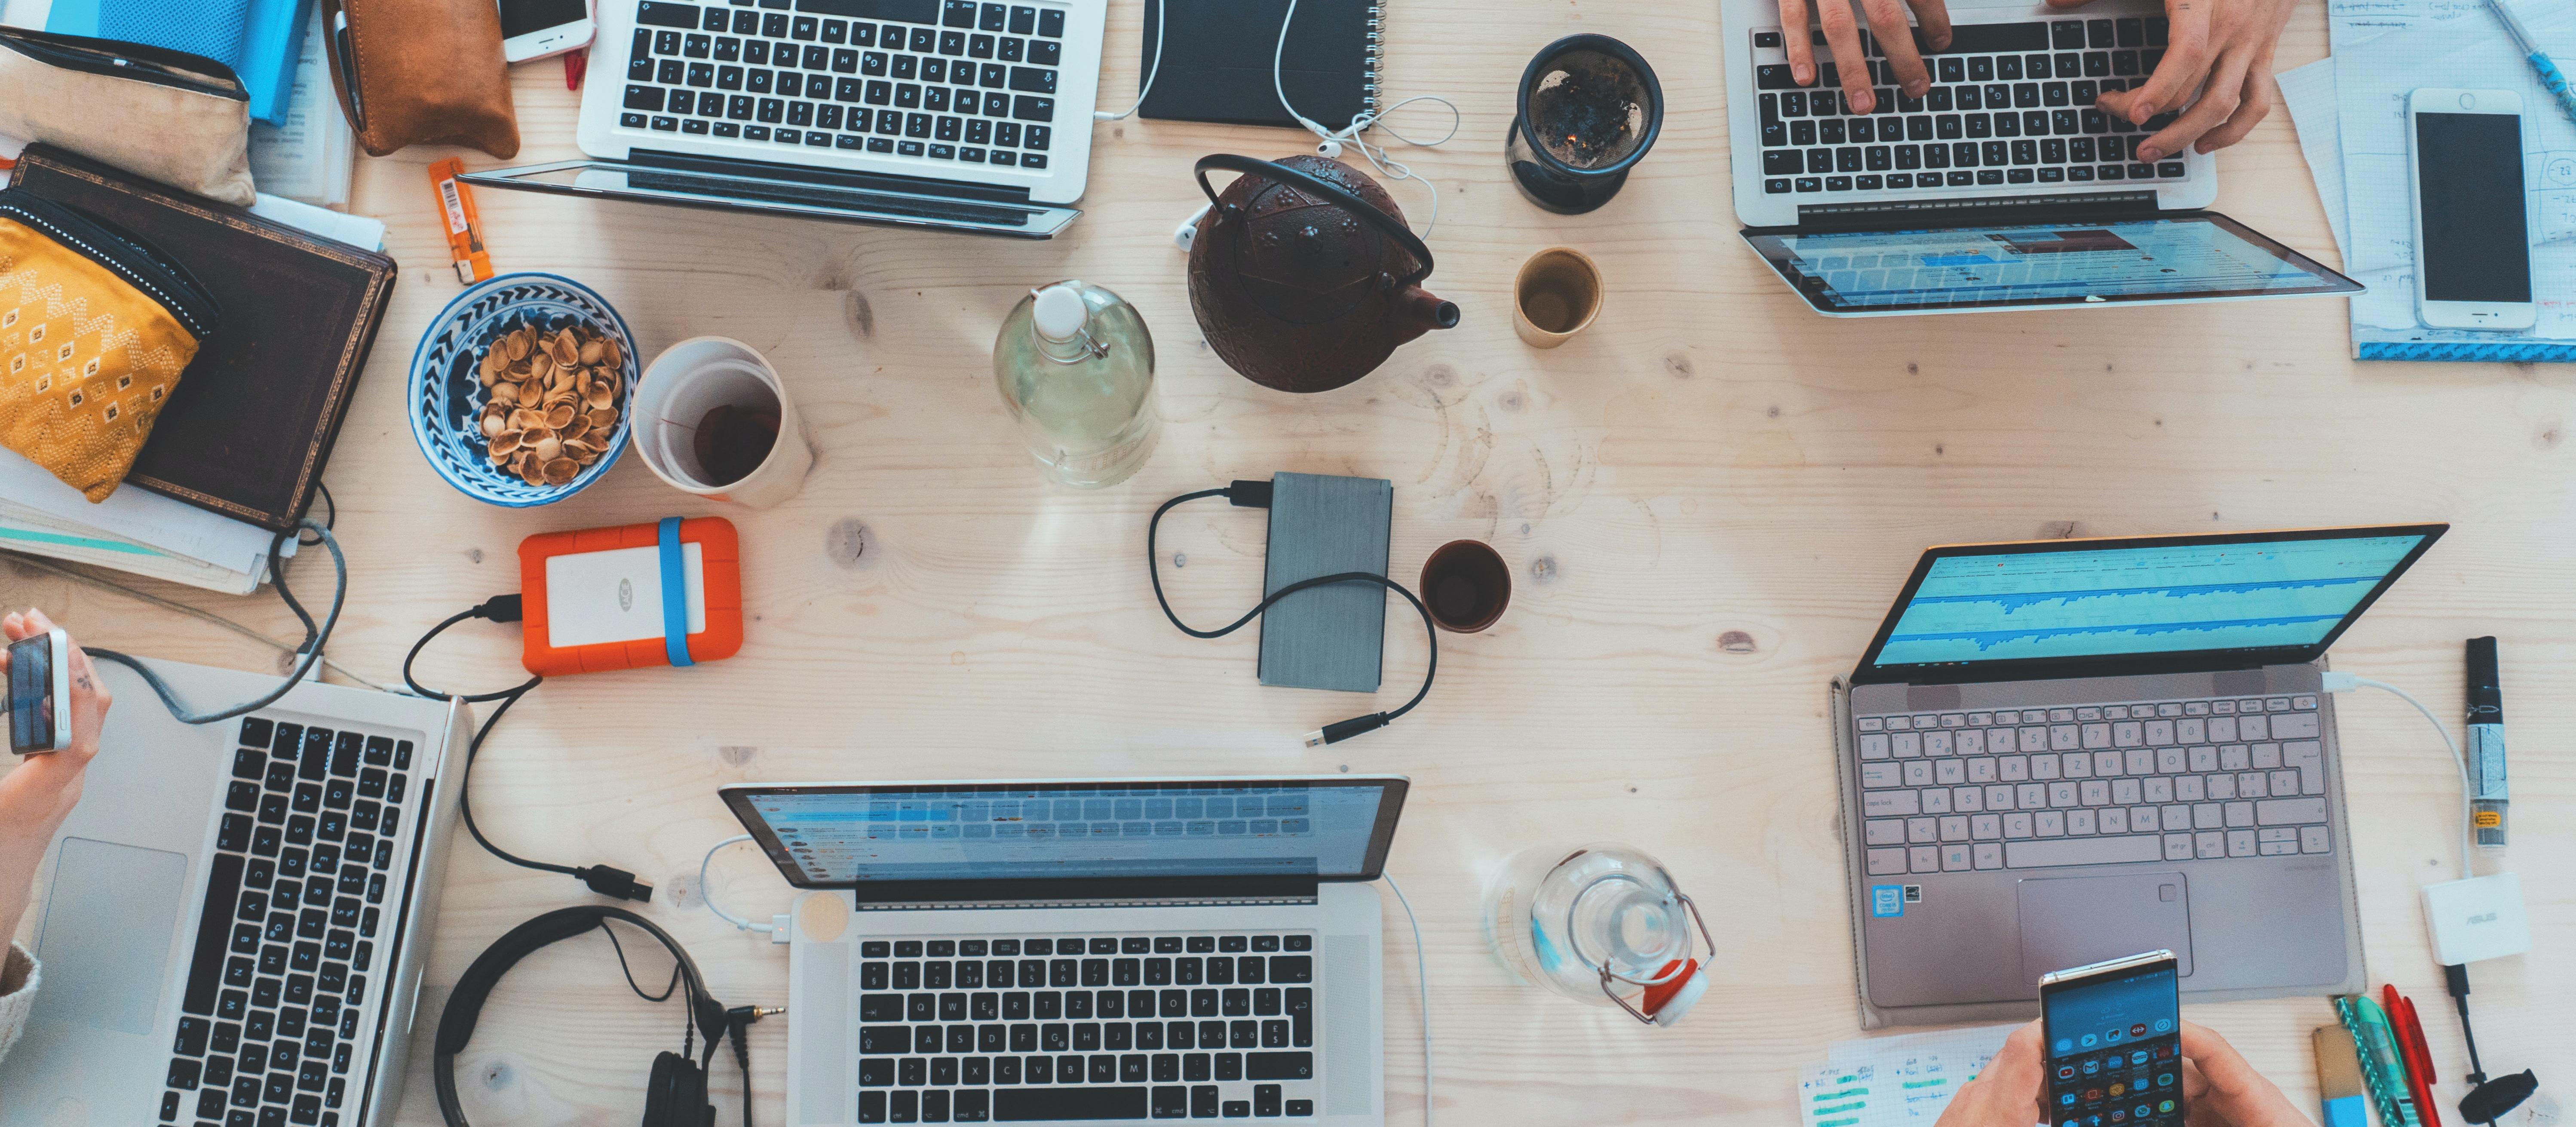 Top view of study group working on desk. Photo: Marvin Meyer on Unsplash